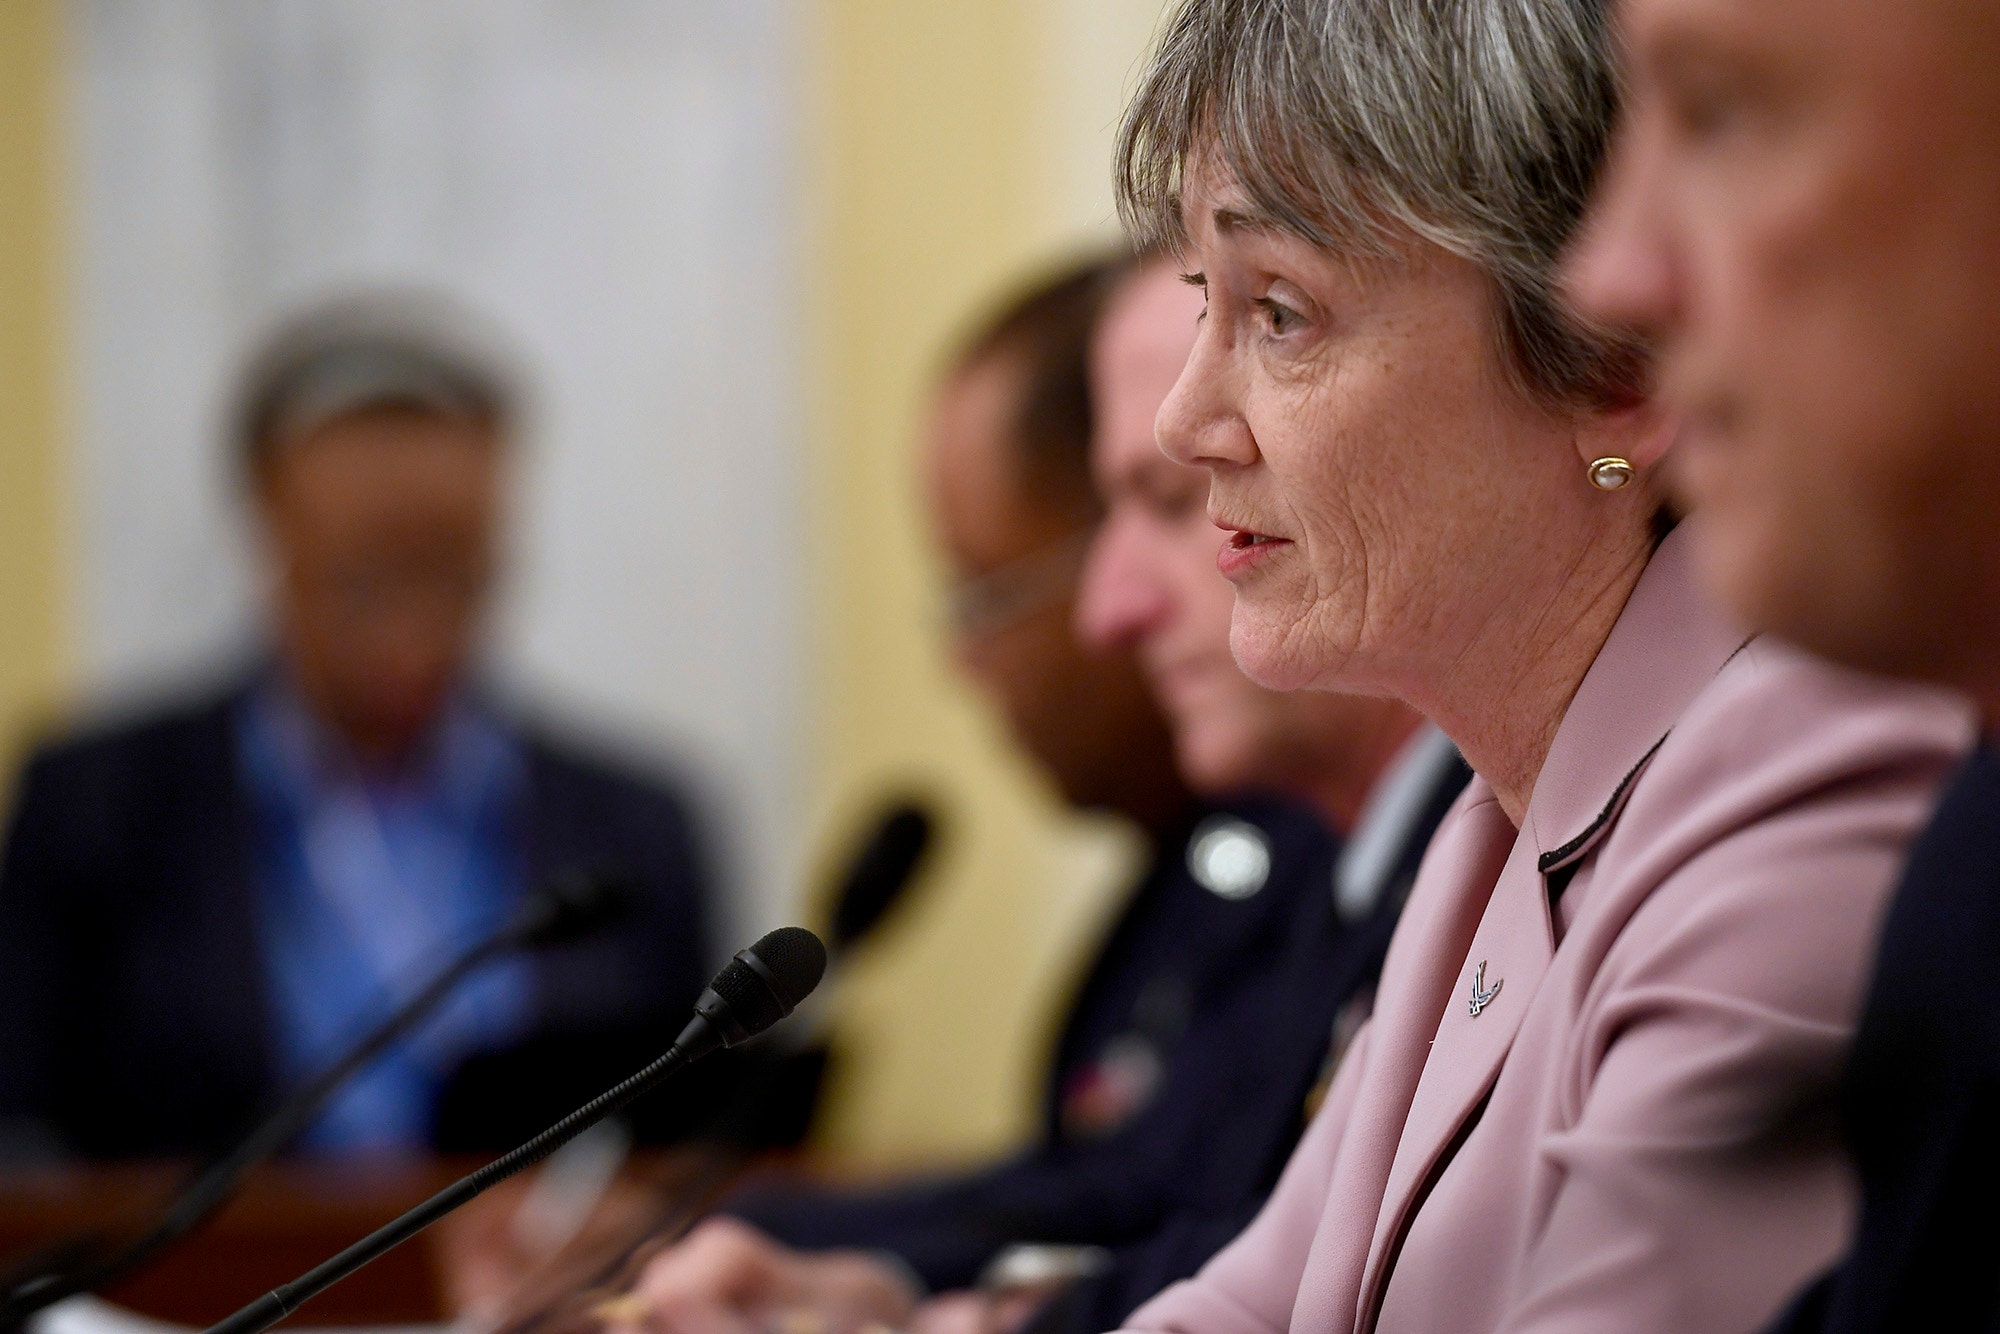 Secretary of the Air Force Heather Wilson testifies before the Senate Armed Services Subcommittee on Strategic Forces May 17, 2017, in Washington, D.C.  With Wilson were Air Force Chief of Staff Gen. David Goldfein, Lt. Gen. Samuel Greaves, the Space and Missile Systems Center commander; Gen. John Raymond, the Air Force Space Command commander and Cristina Chapin, the General Accounting Office director of acquisition and sourcing management. The committee examined military space organization, policy, and programs.   (U.S. Air Force photo/Scott M. Ash)